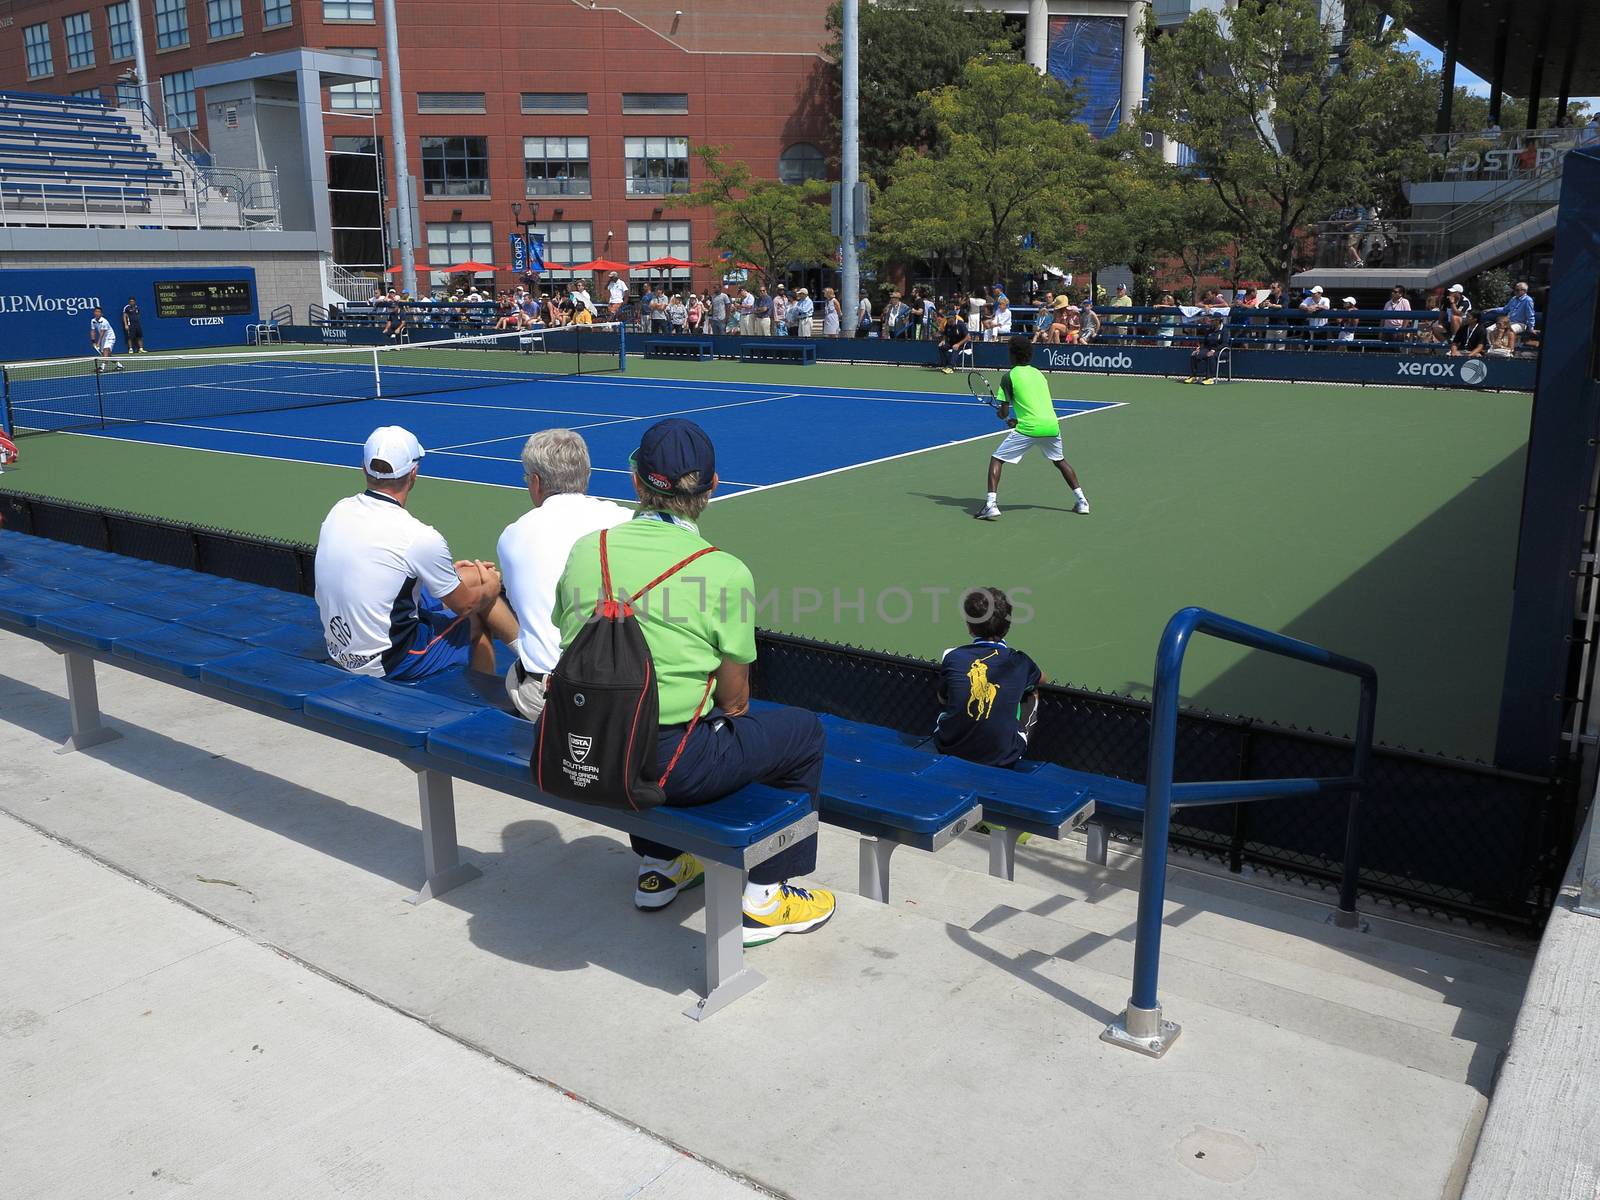 US Open Tennis Side Courts by Ffooter